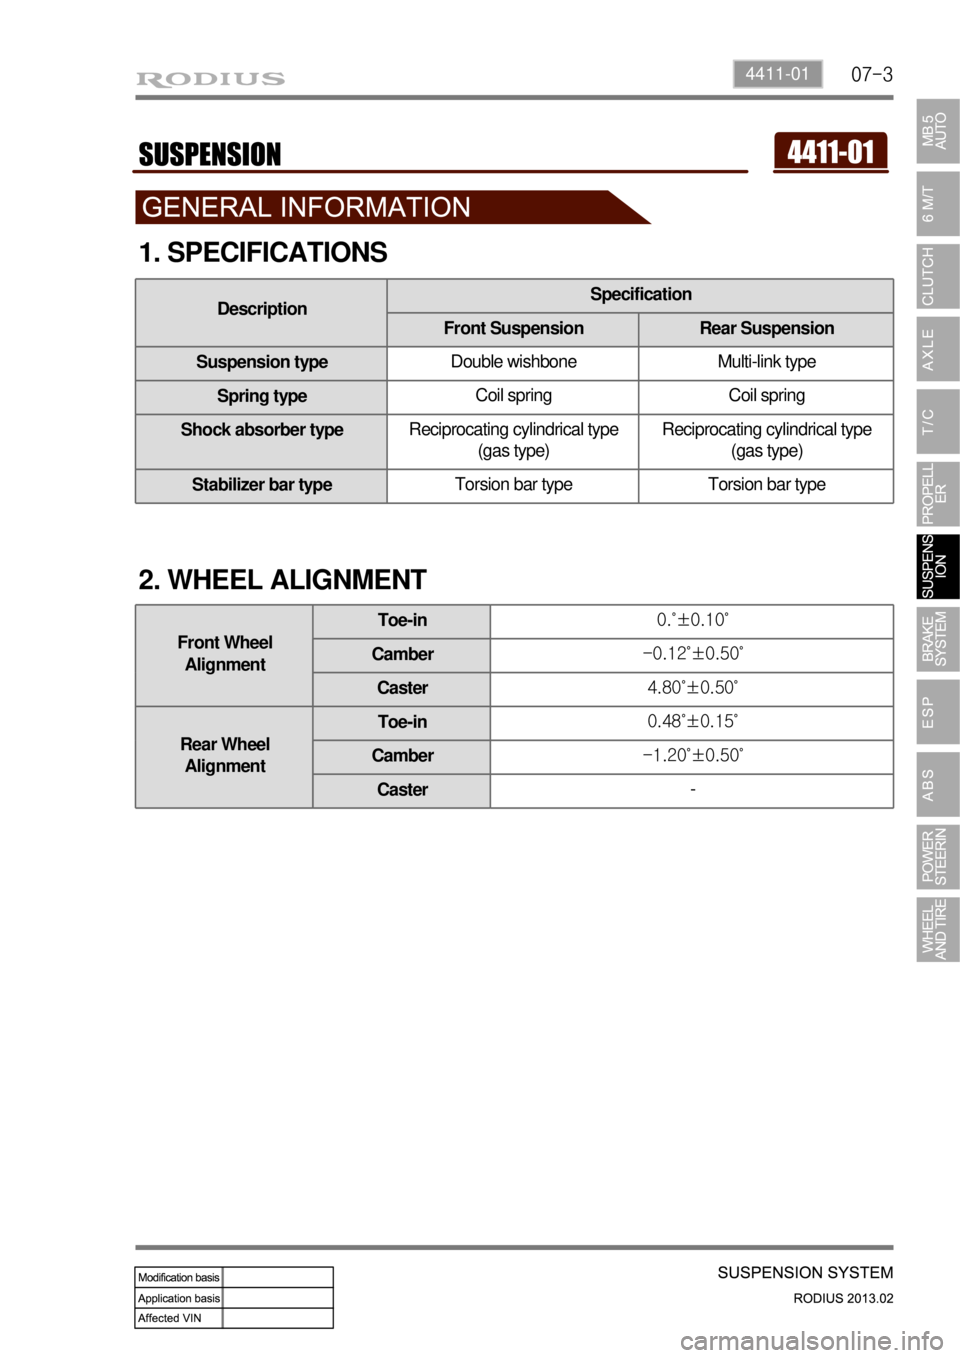 SSANGYONG TURISMO 2013  Service Manual 07-34411-01
1. SPECIFICATIONS
DescriptionSpecification
Front Suspension Rear Suspension
Suspension typeDouble wishbone Multi-link type
Spring typeCoil spring Coil spring
Shock absorber typeReciprocati